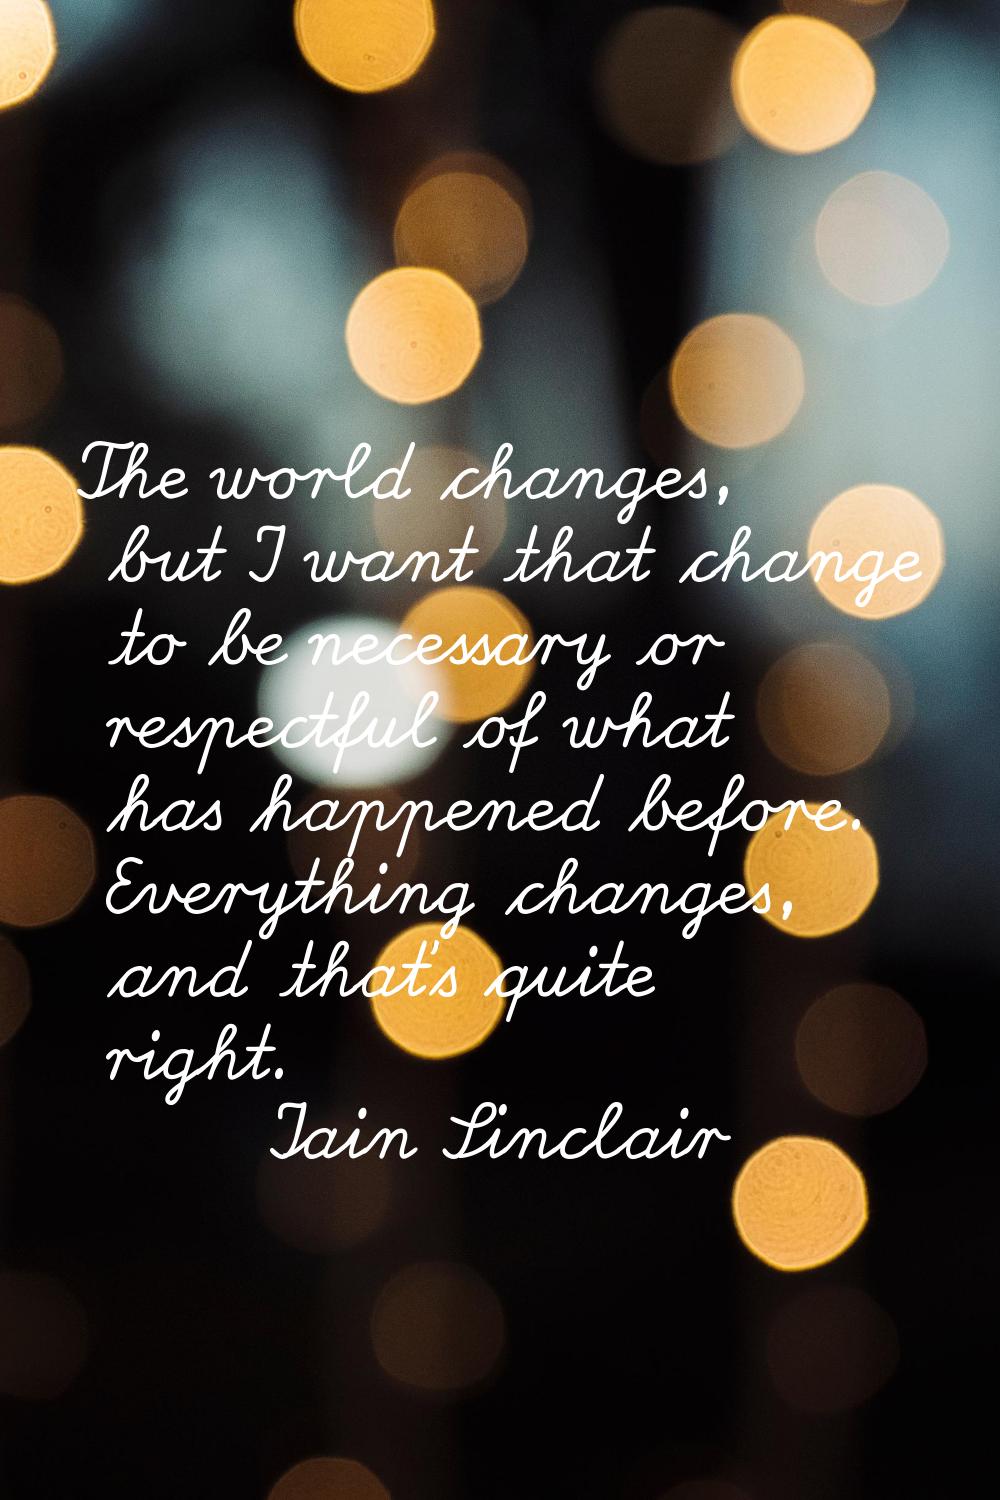 The world changes, but I want that change to be necessary or respectful of what has happened before